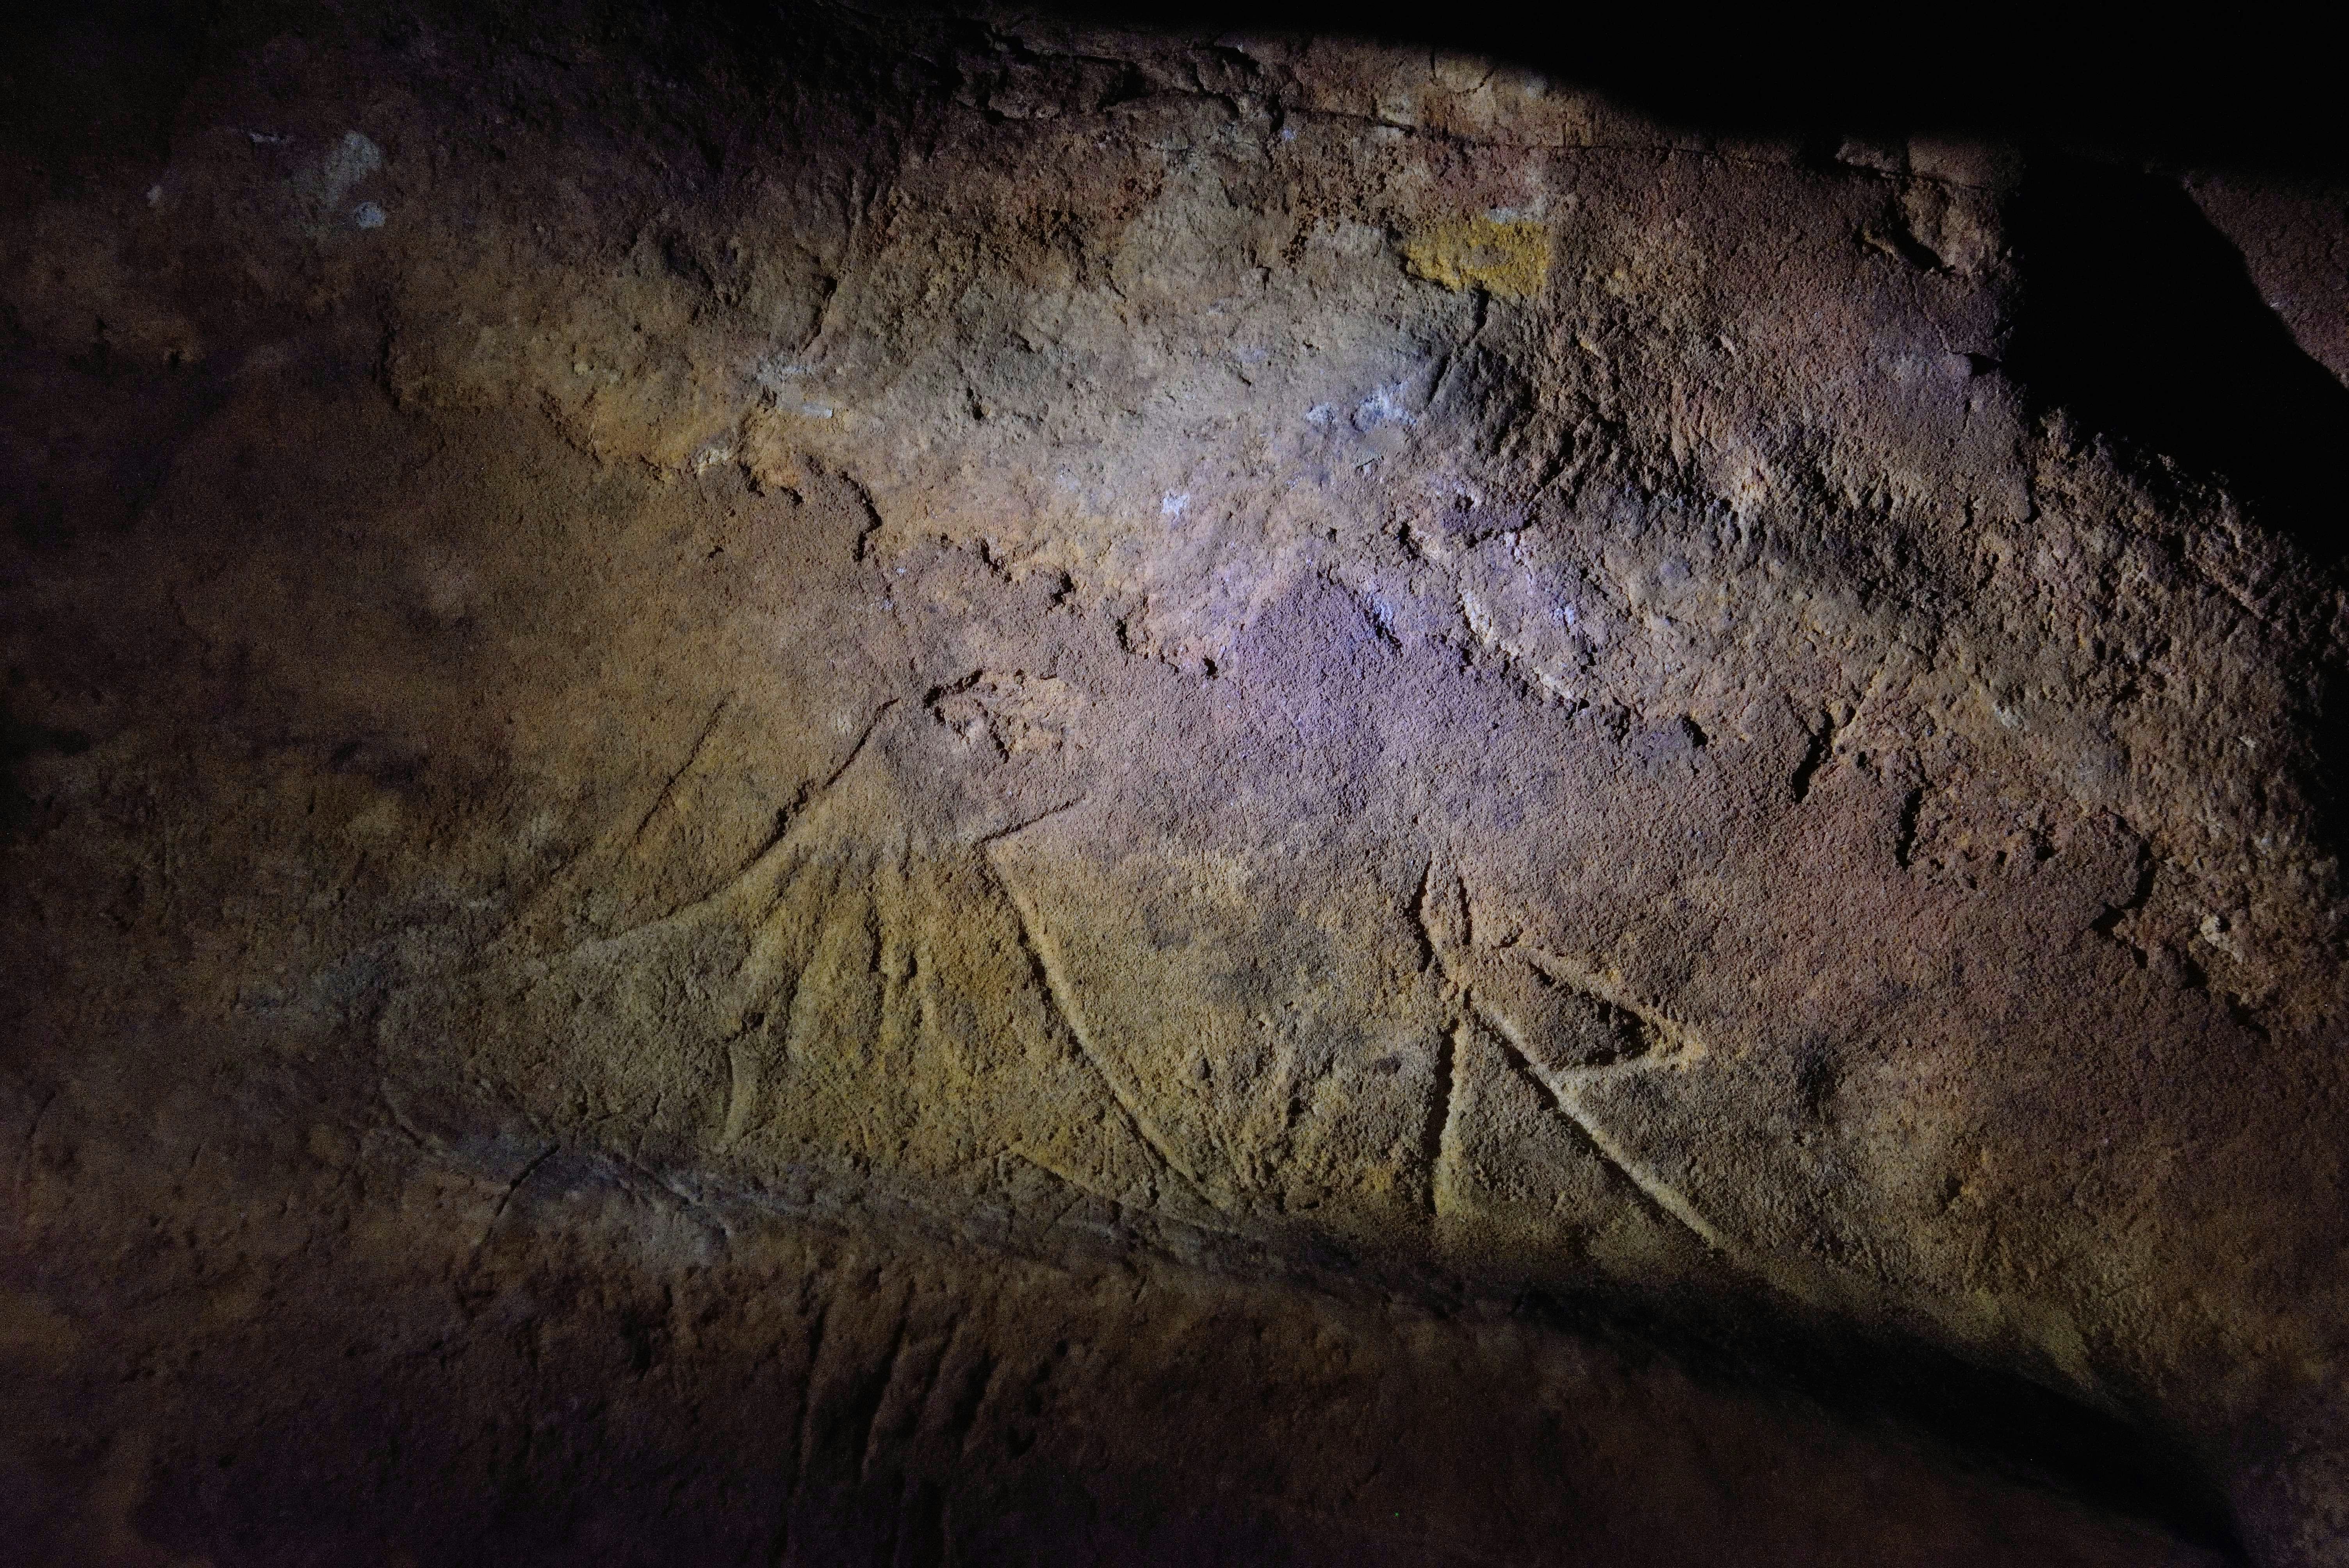 Geometric abstract art engravings on the wall of a cave